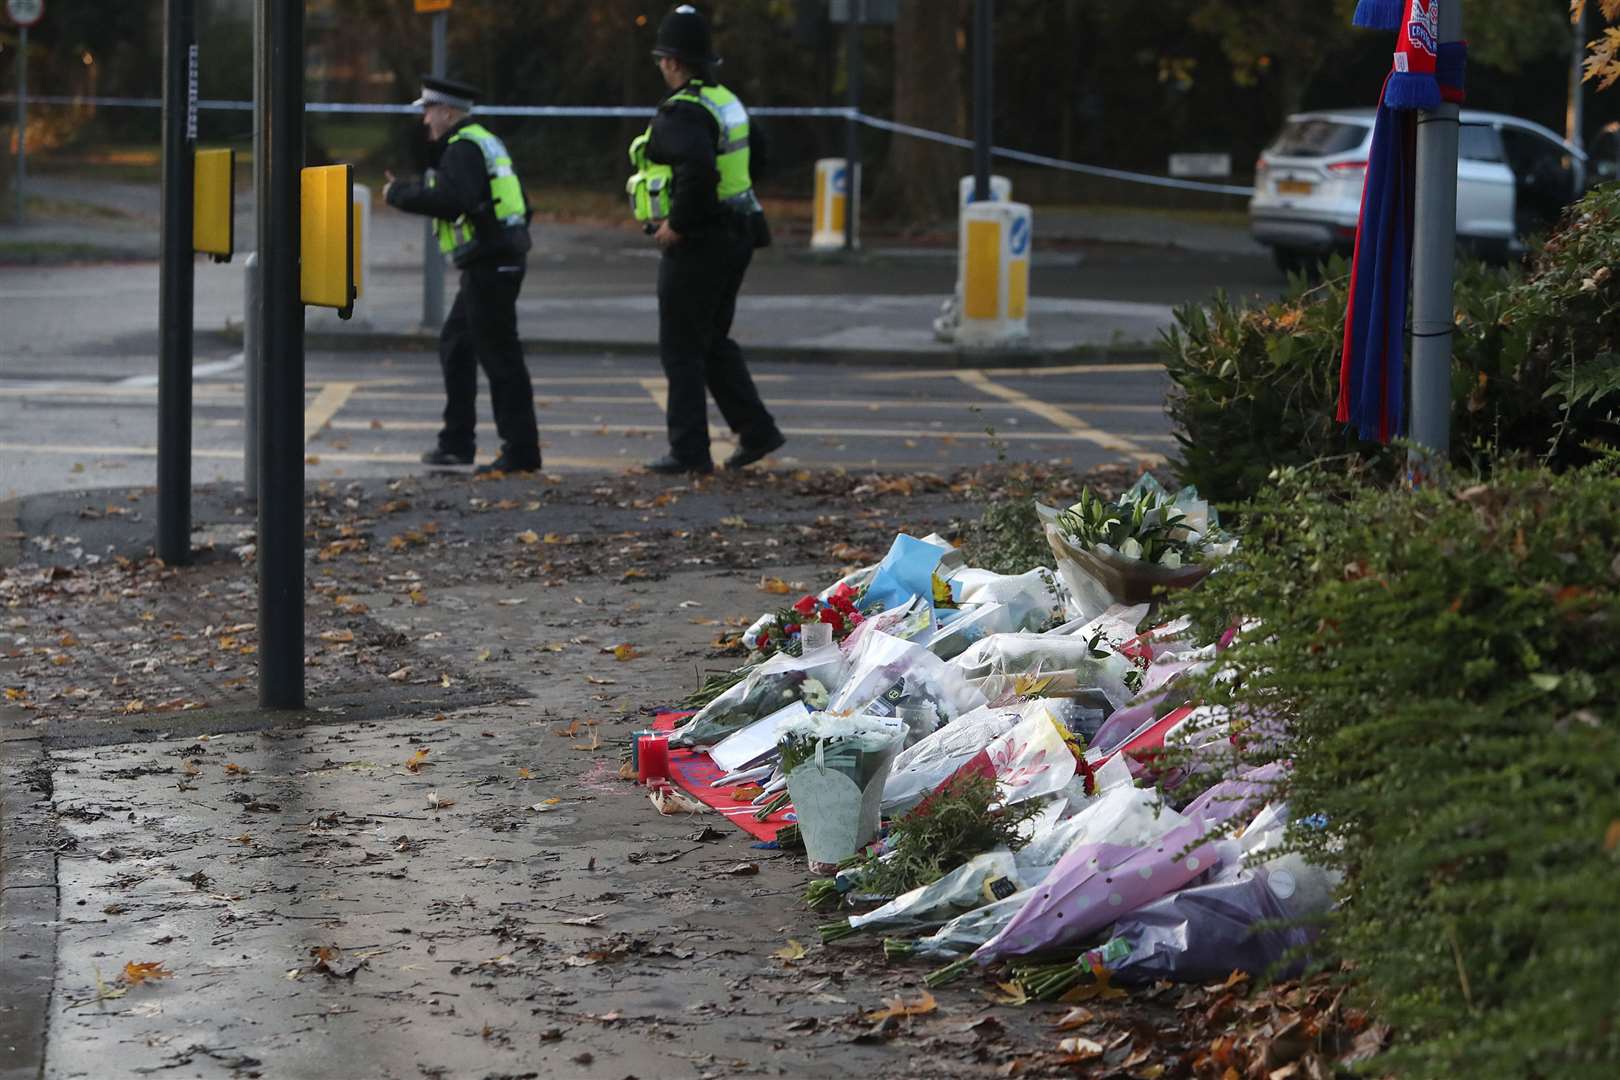 Flowers left at the scene after the tram crash in Croydon, Surrey (Steve Parsons/PA)